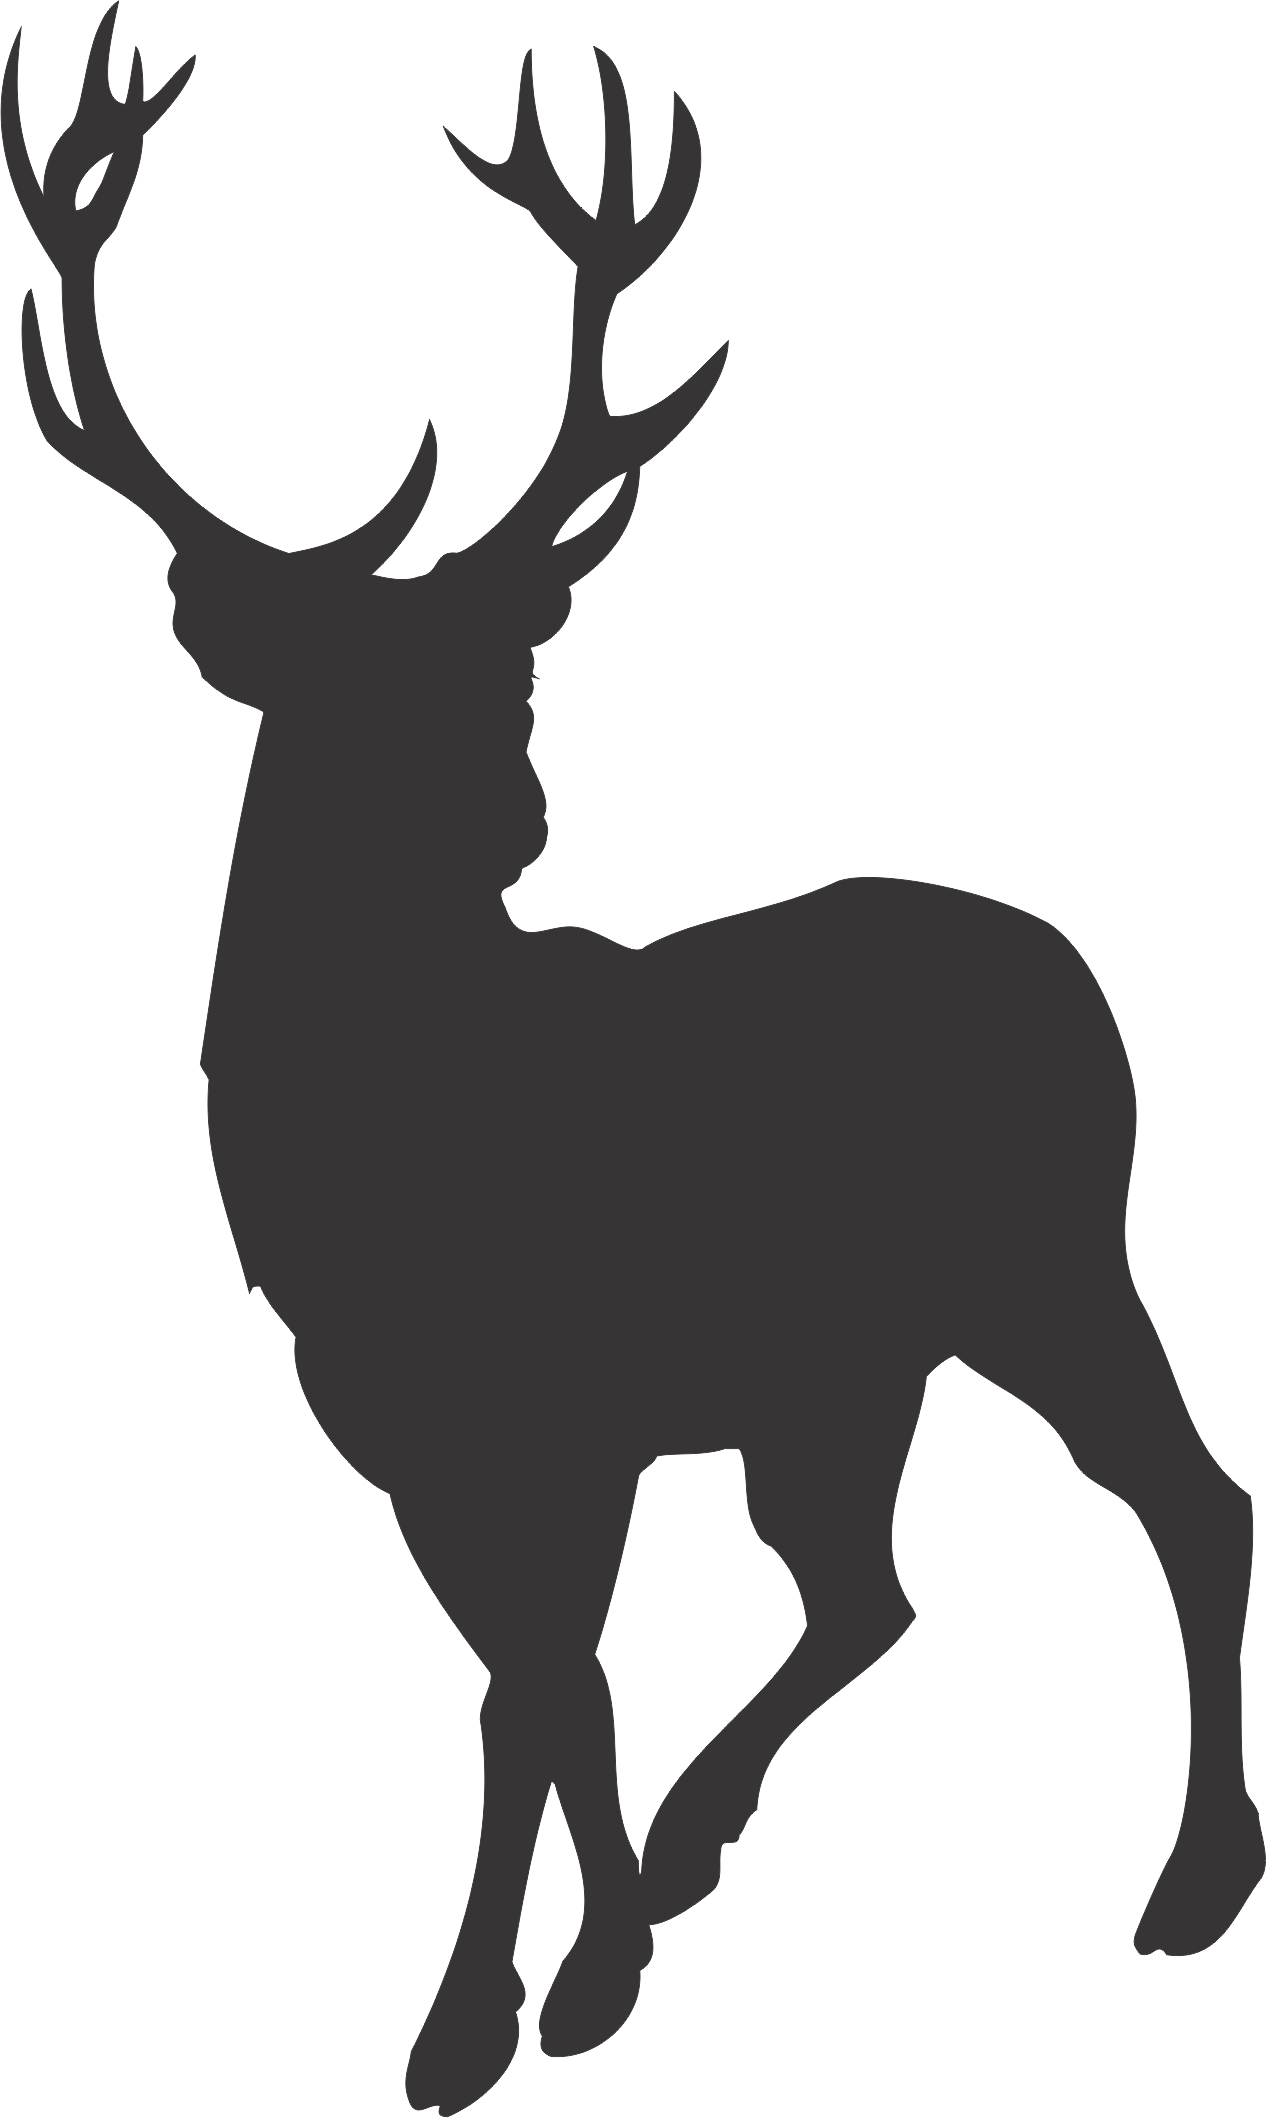 Stag silhouette clipart